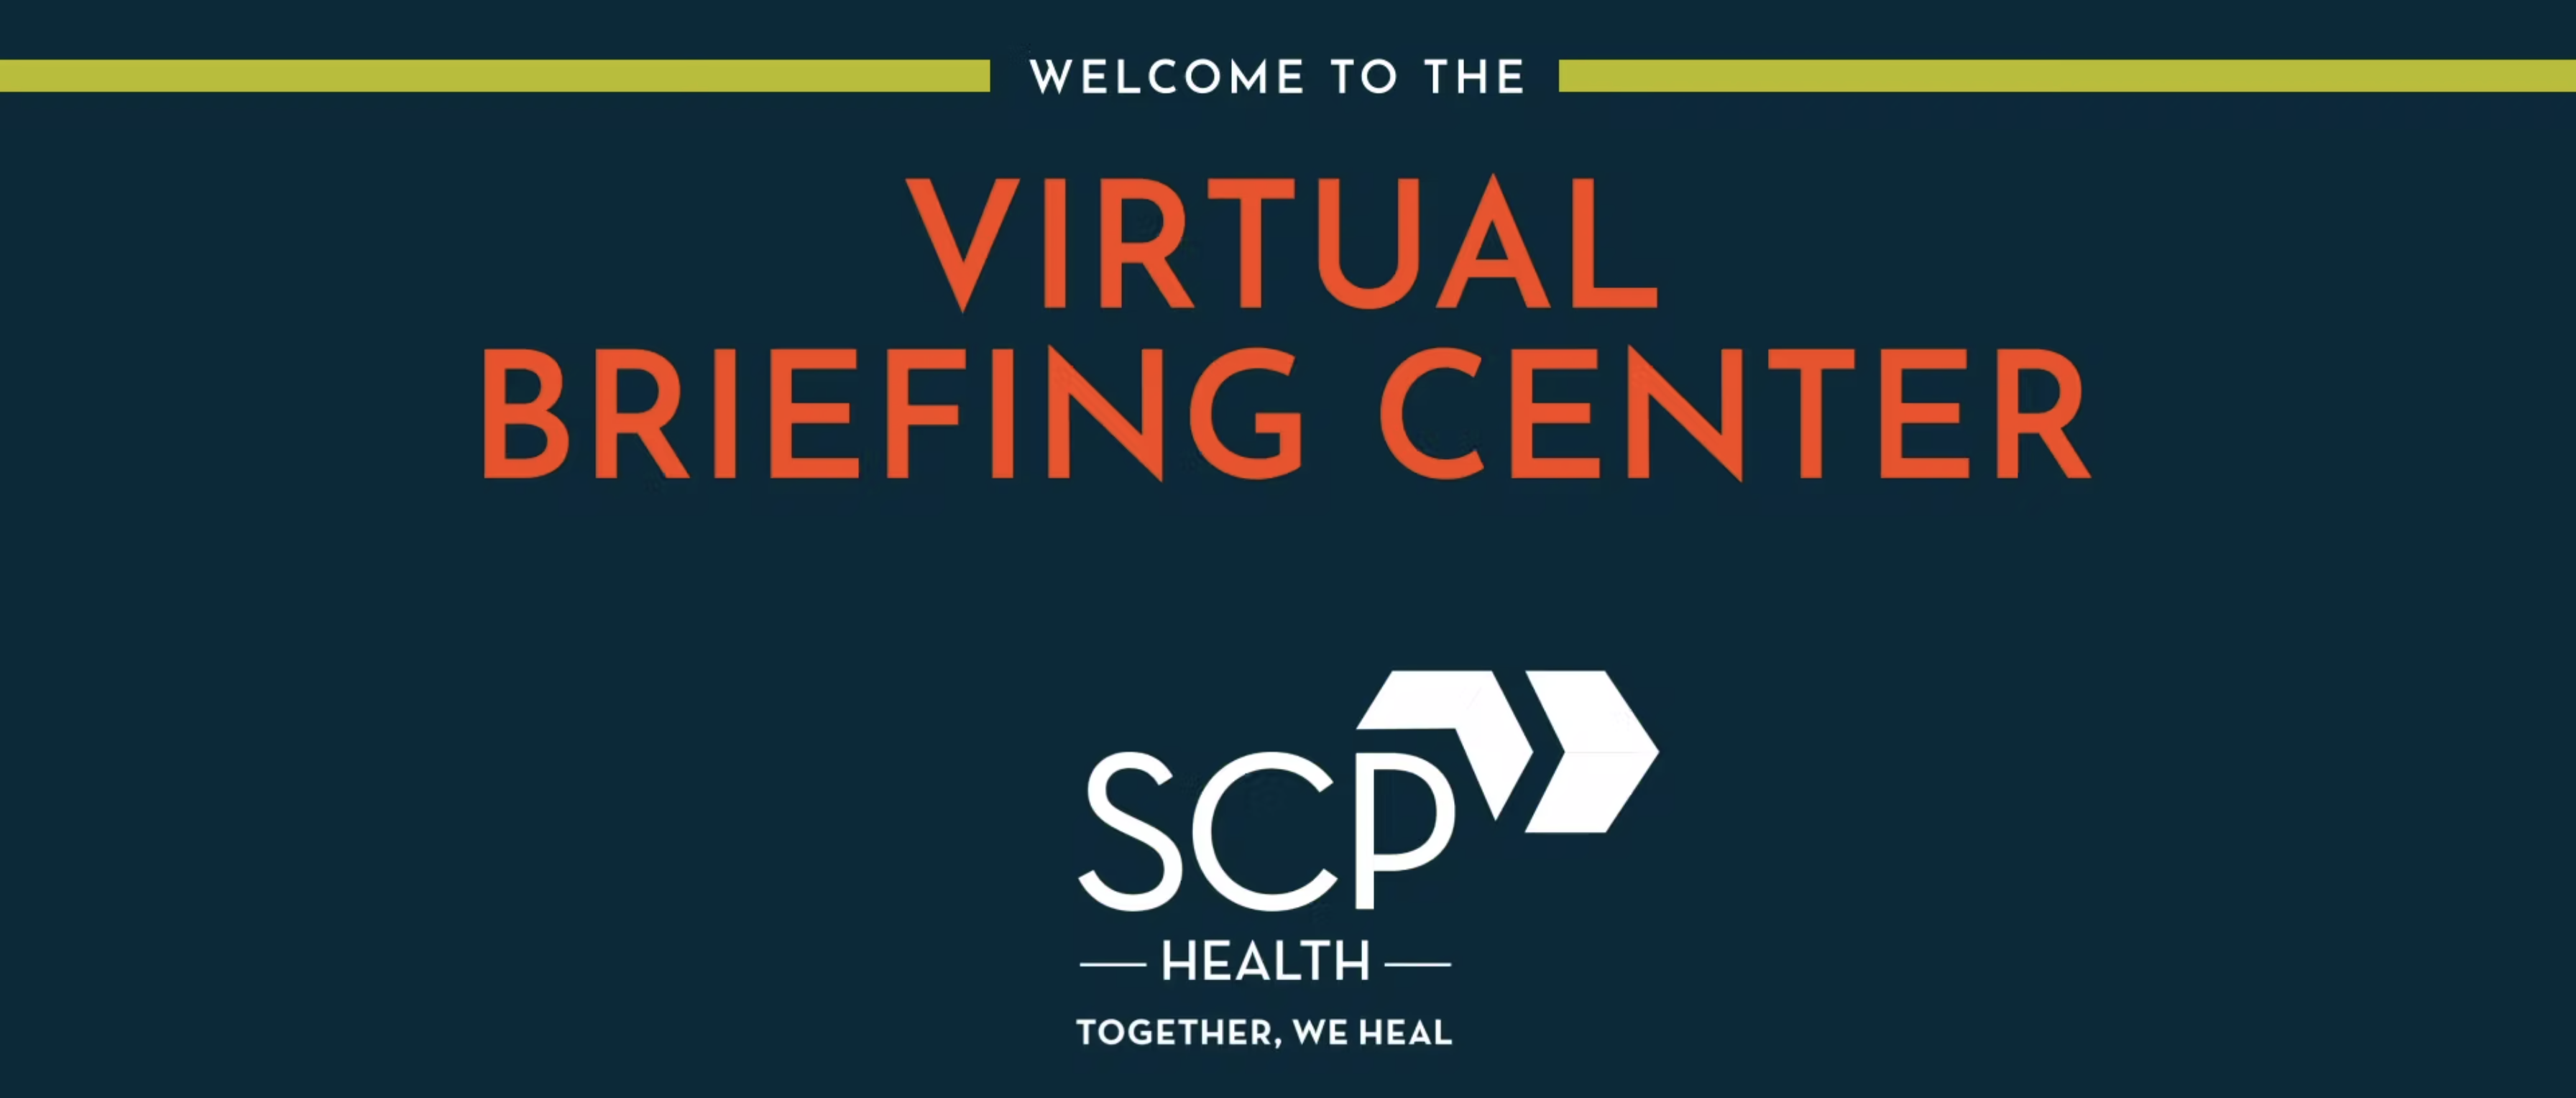 Virtual-BriefingCenter welcome